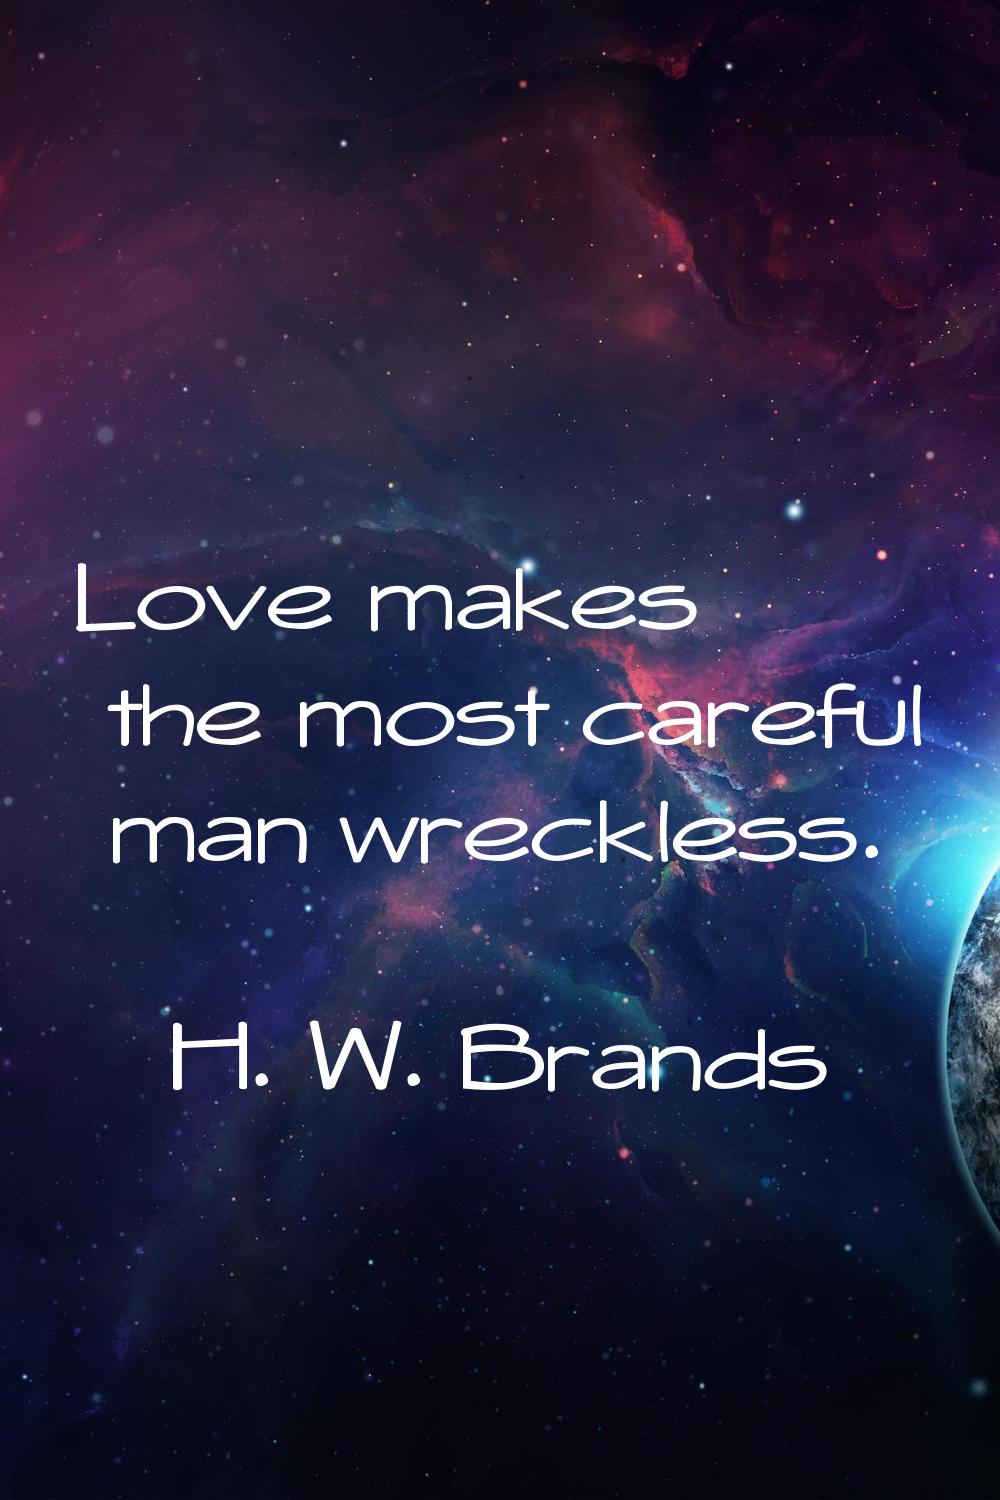 Love makes the most careful man wreckless.